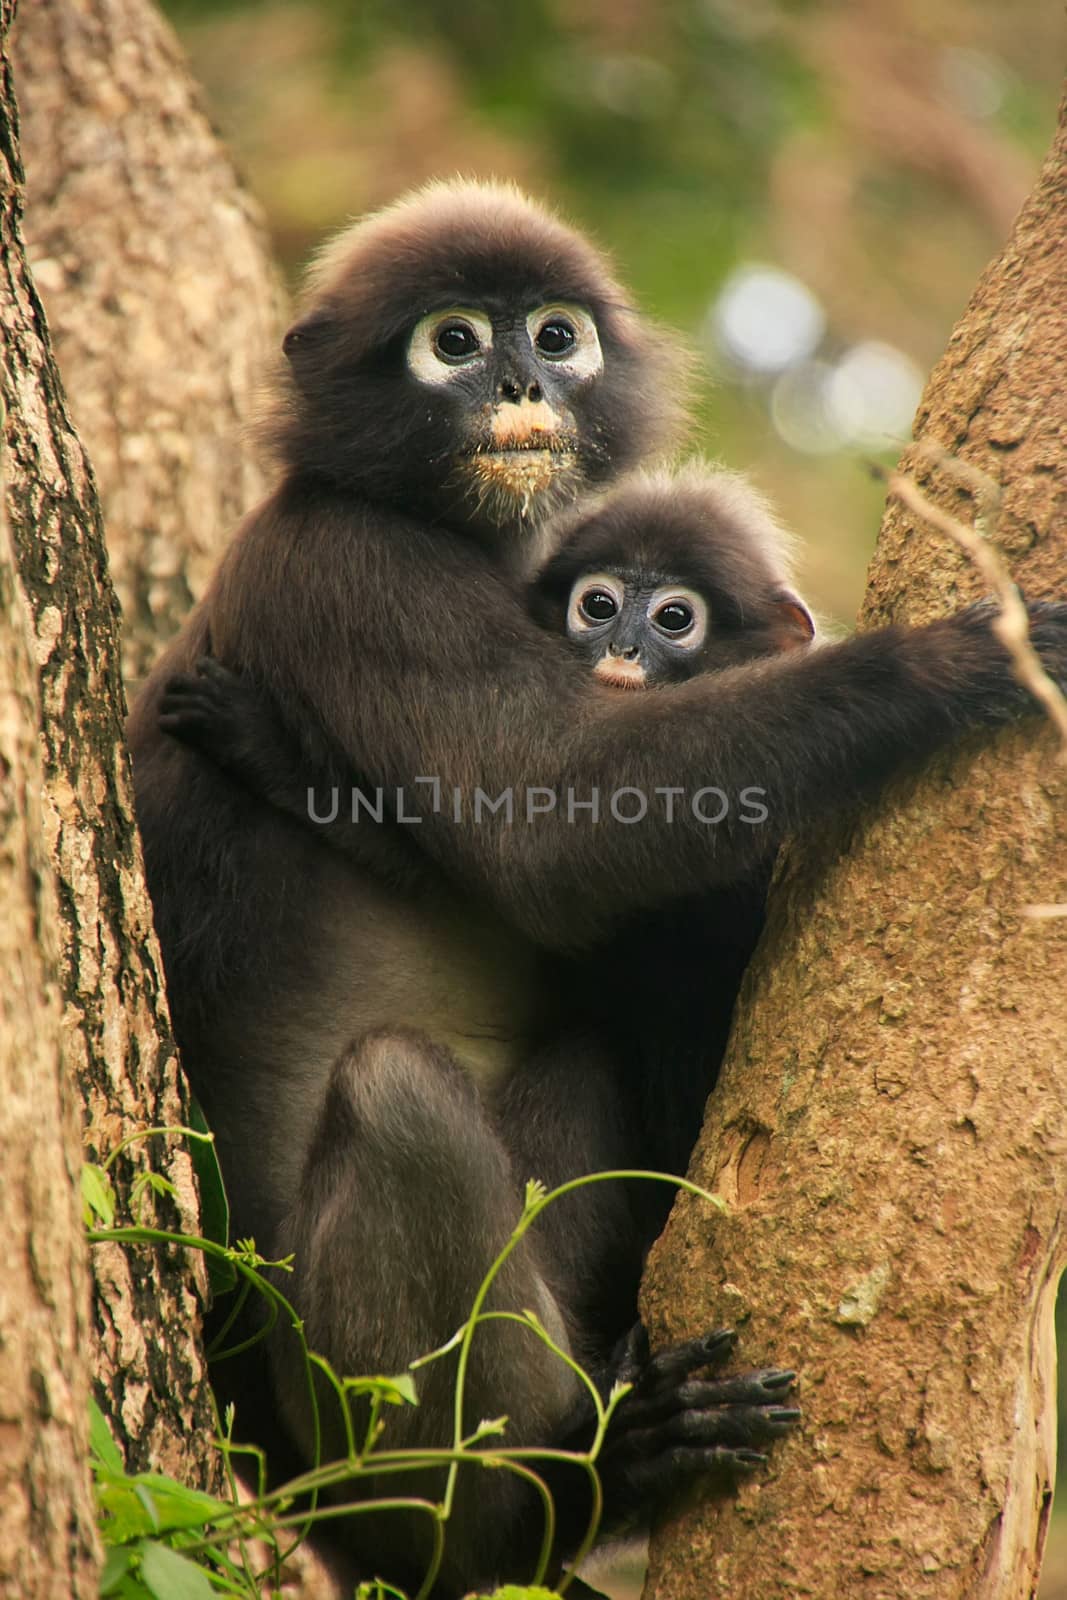 Spectacled langur sitting in a tree with a baby, Wua Talap island, Ang Thong National Marine Park, Thailand